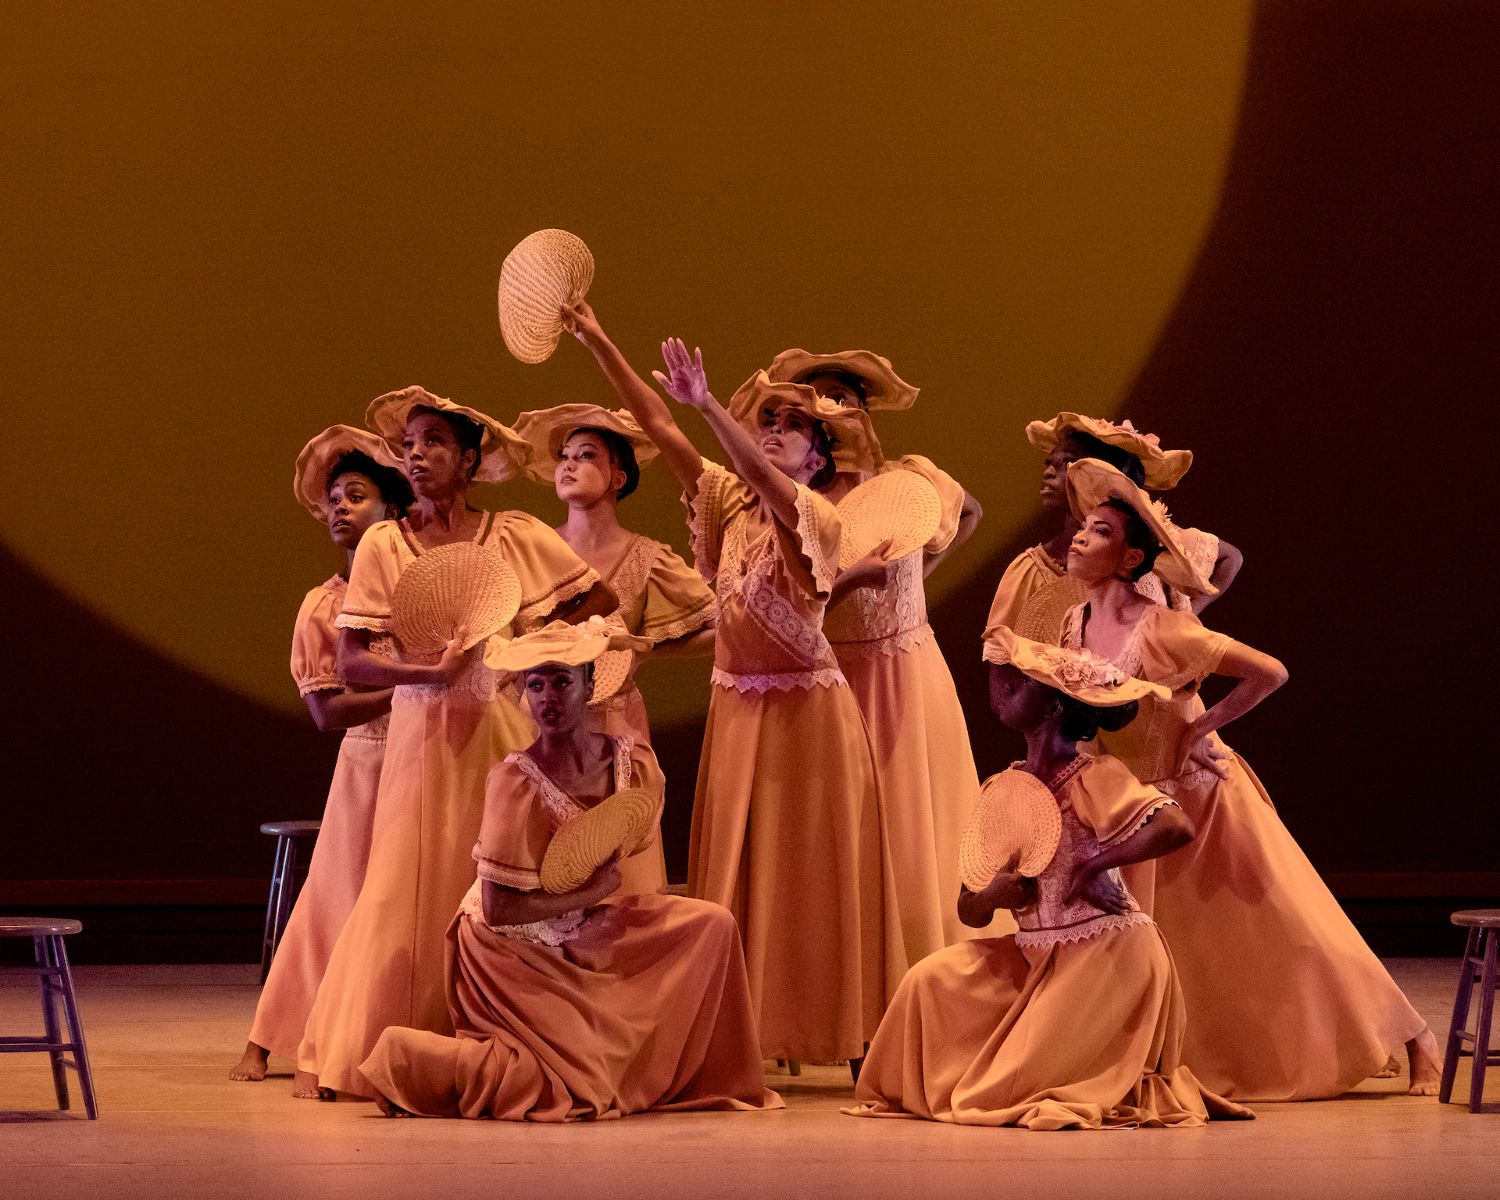 PHOTO: Paul Koknick | The South Pasadenan | Alvin Ailey American Dance Theater in Alvin Ailey's "Revelations".